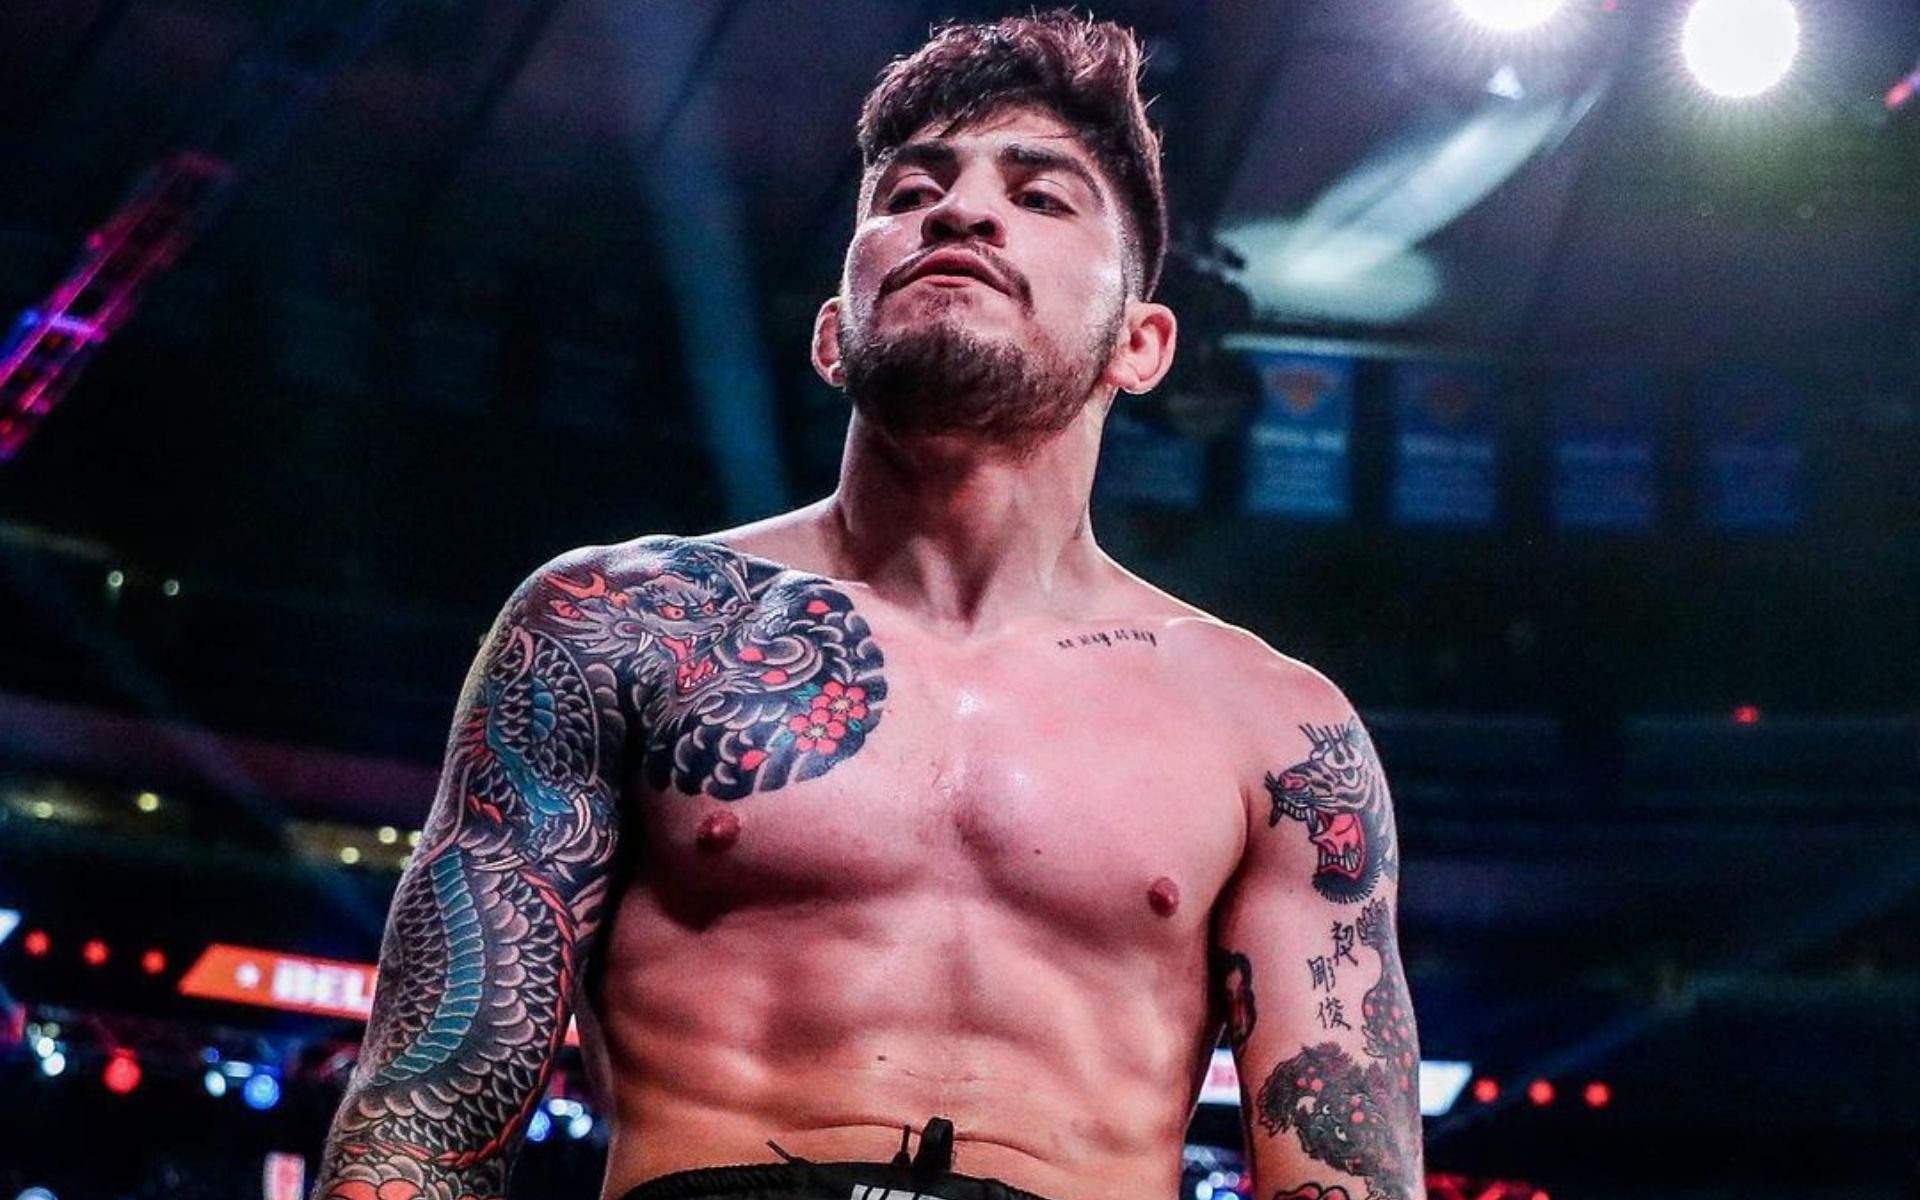 Dillon Danis issues his potentially last callout [Image courtesy: @dillondanis on Instagram]